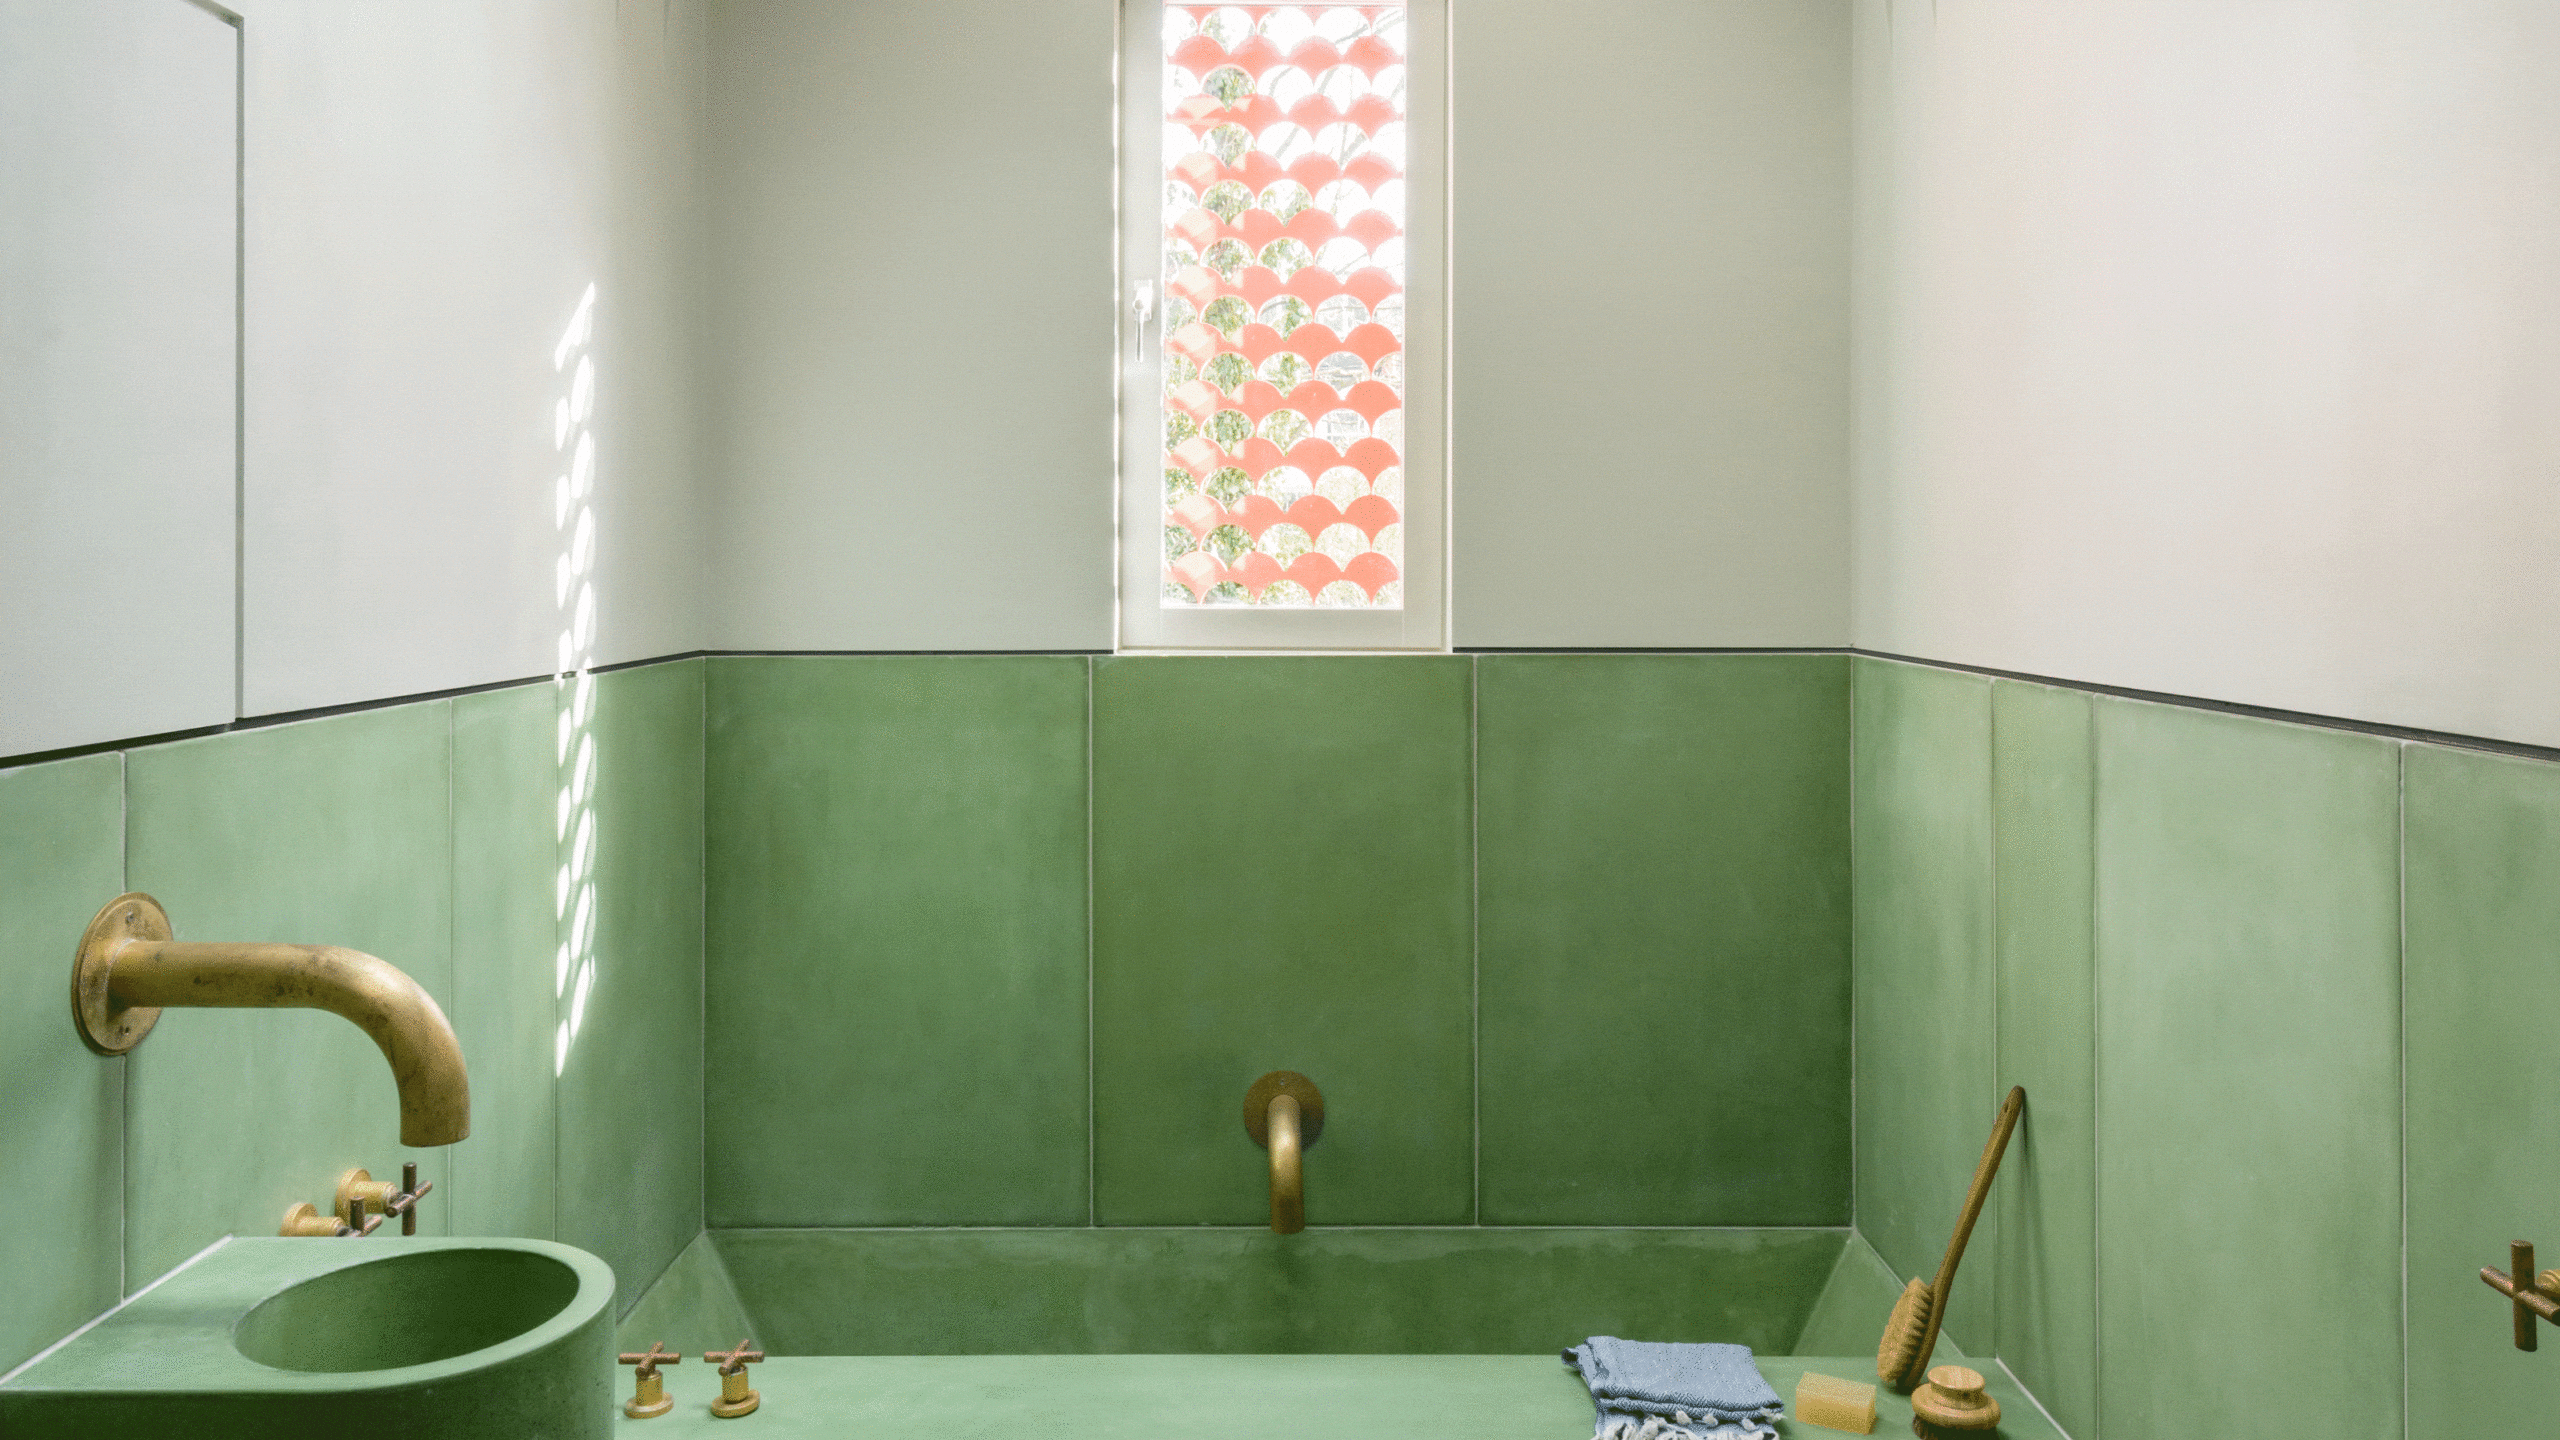 A bathroom with green colored concrete making up the floor, sink, and bathtub, with brass fixtures, as found on HomeDecorCraze.